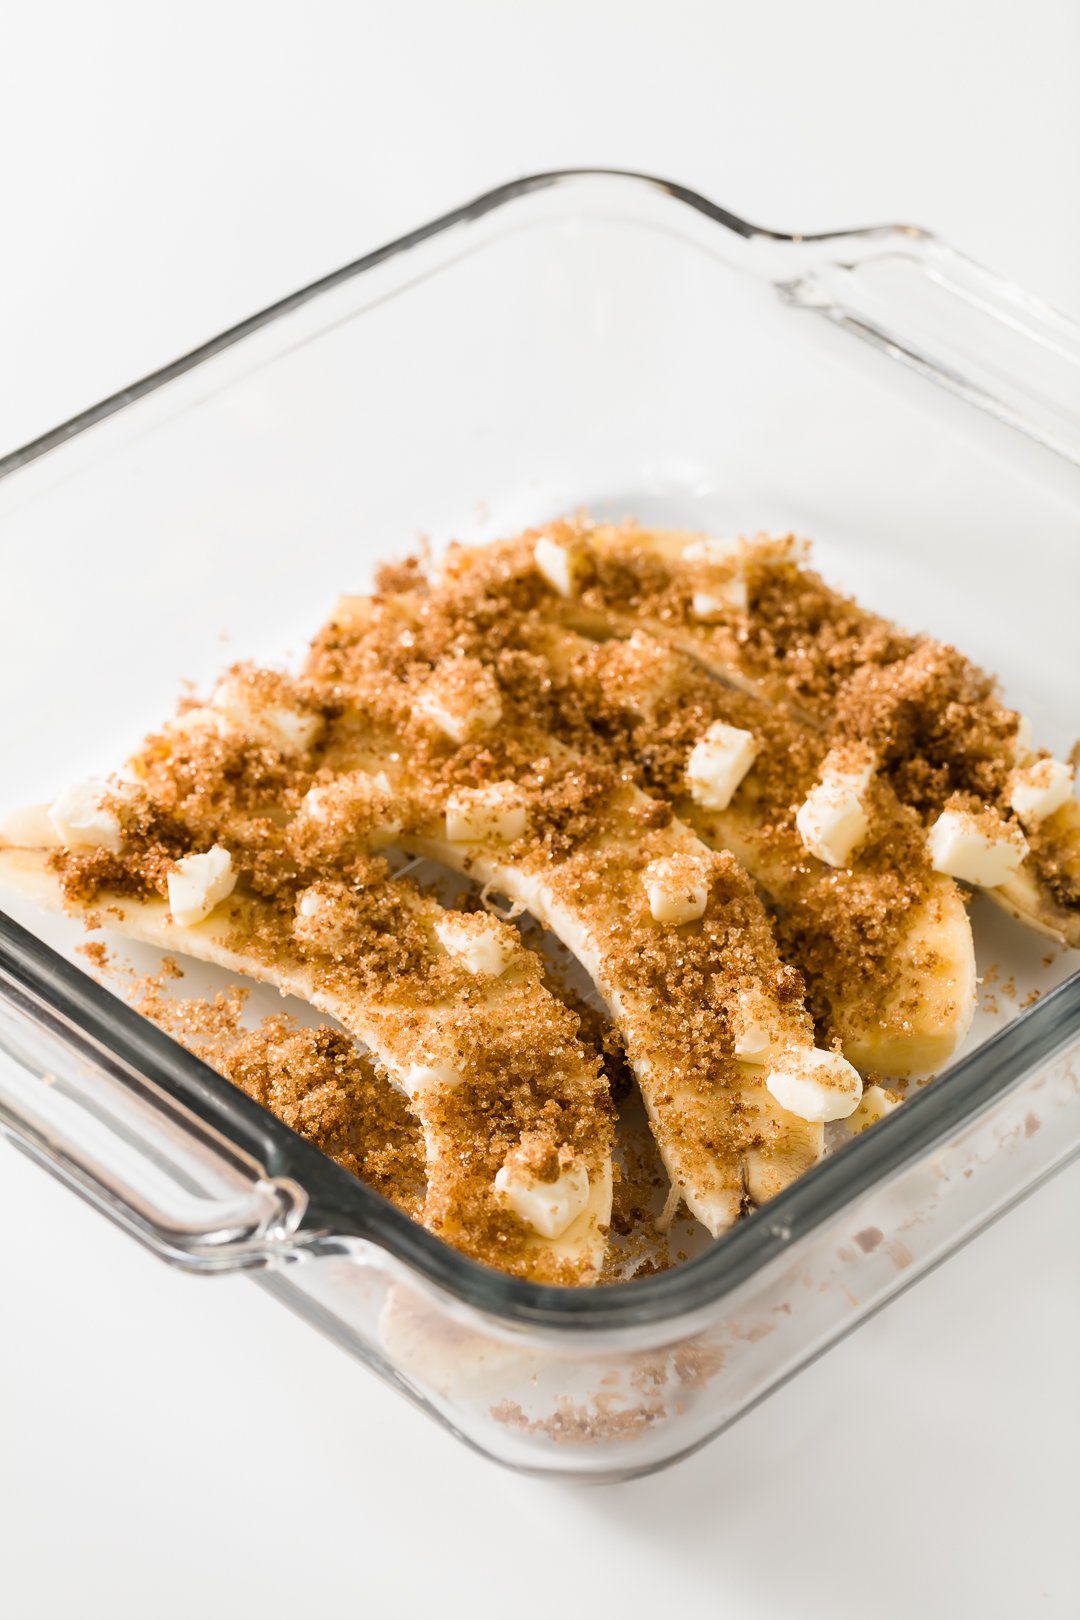 Bananas sliced longways in a glass baking dish covered in butter and brown sugar